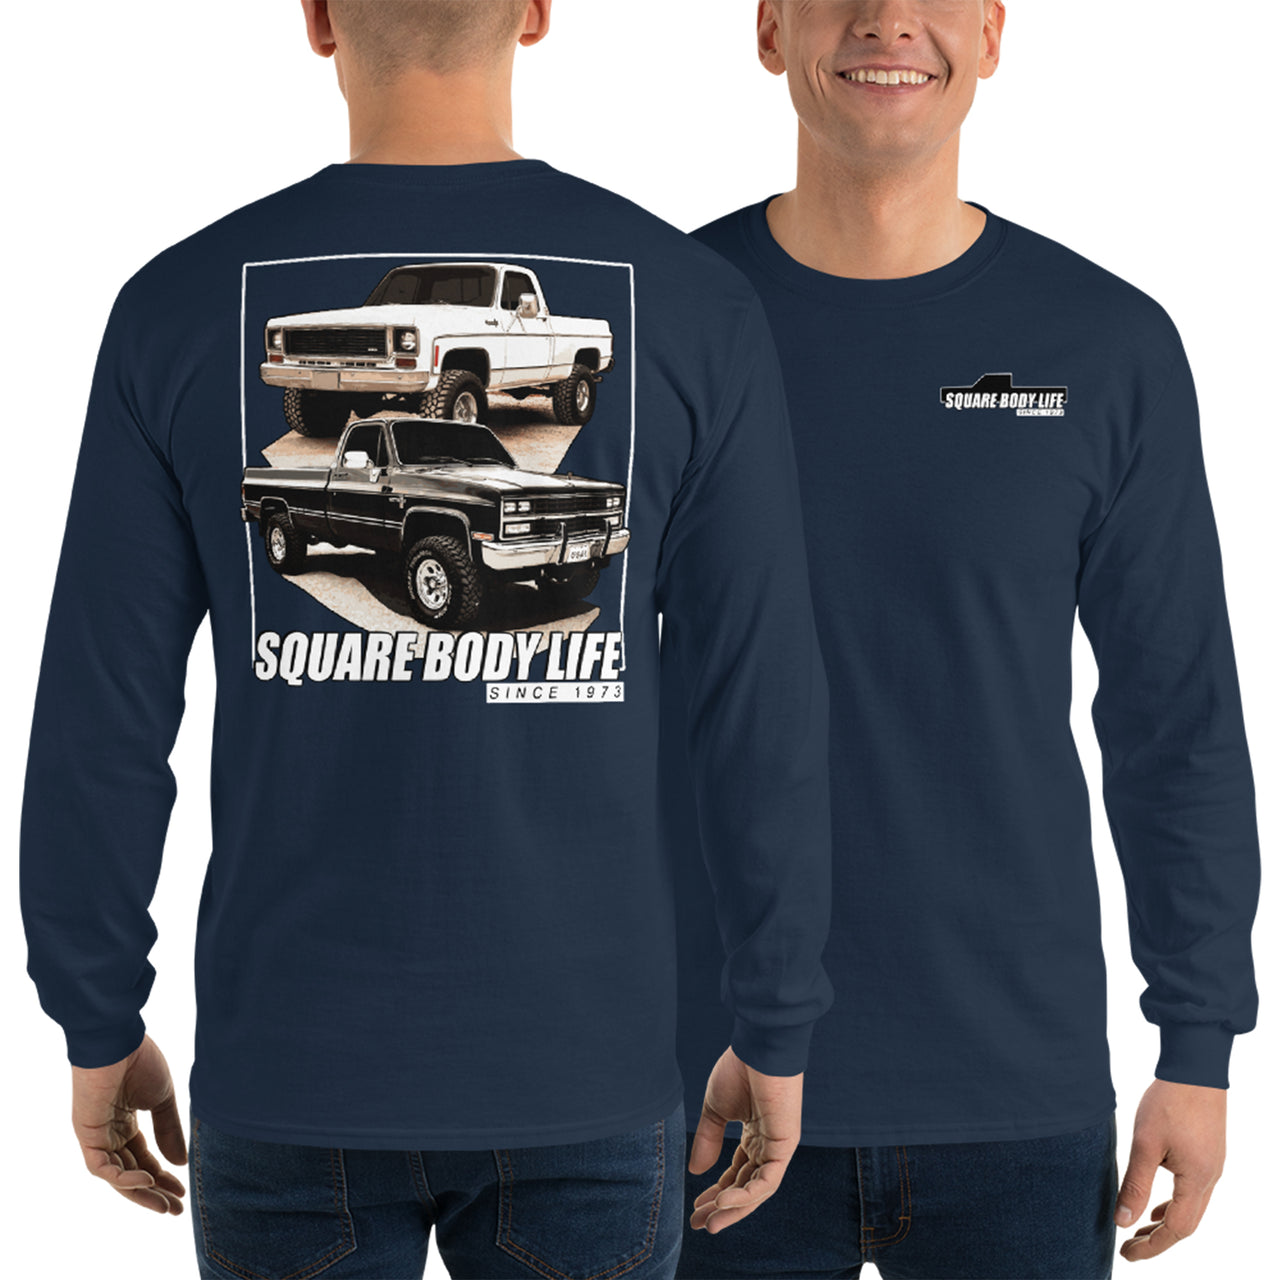 Square Body Life Long Sleeve T-Shirt modeled in navy